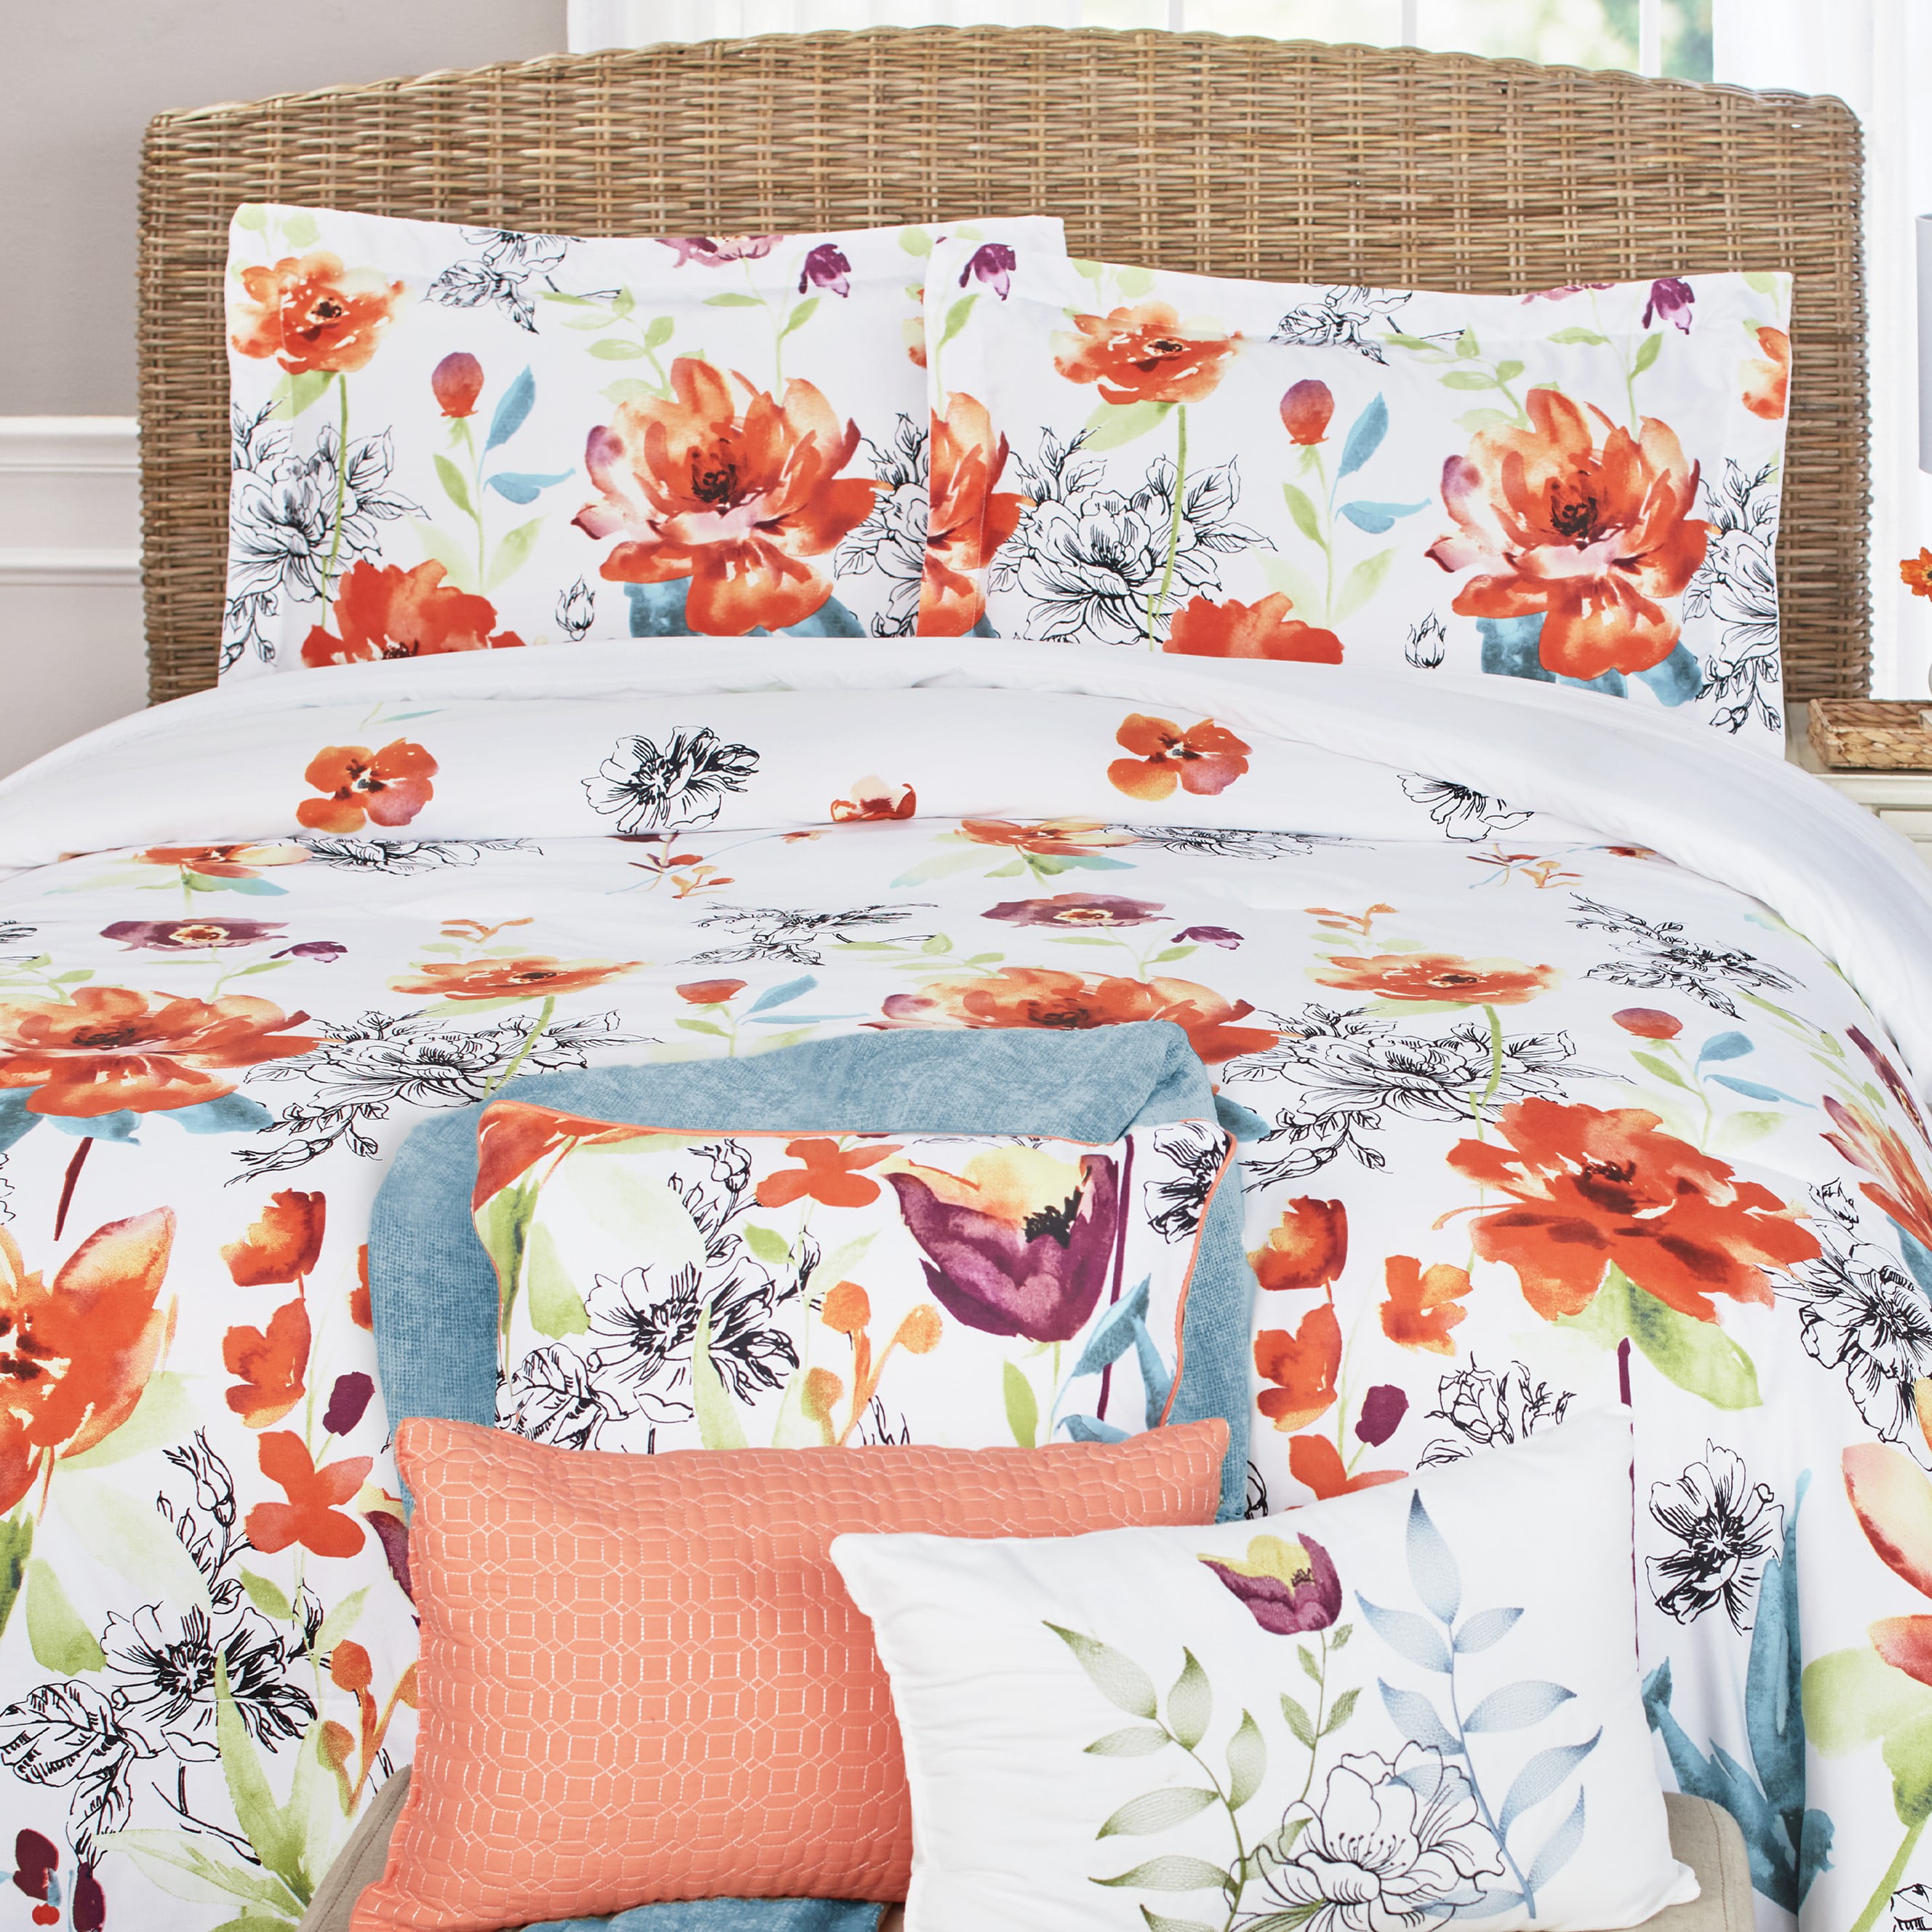 6 Piece Fl Comforter Set With, Is There A Duvet Larger Than King